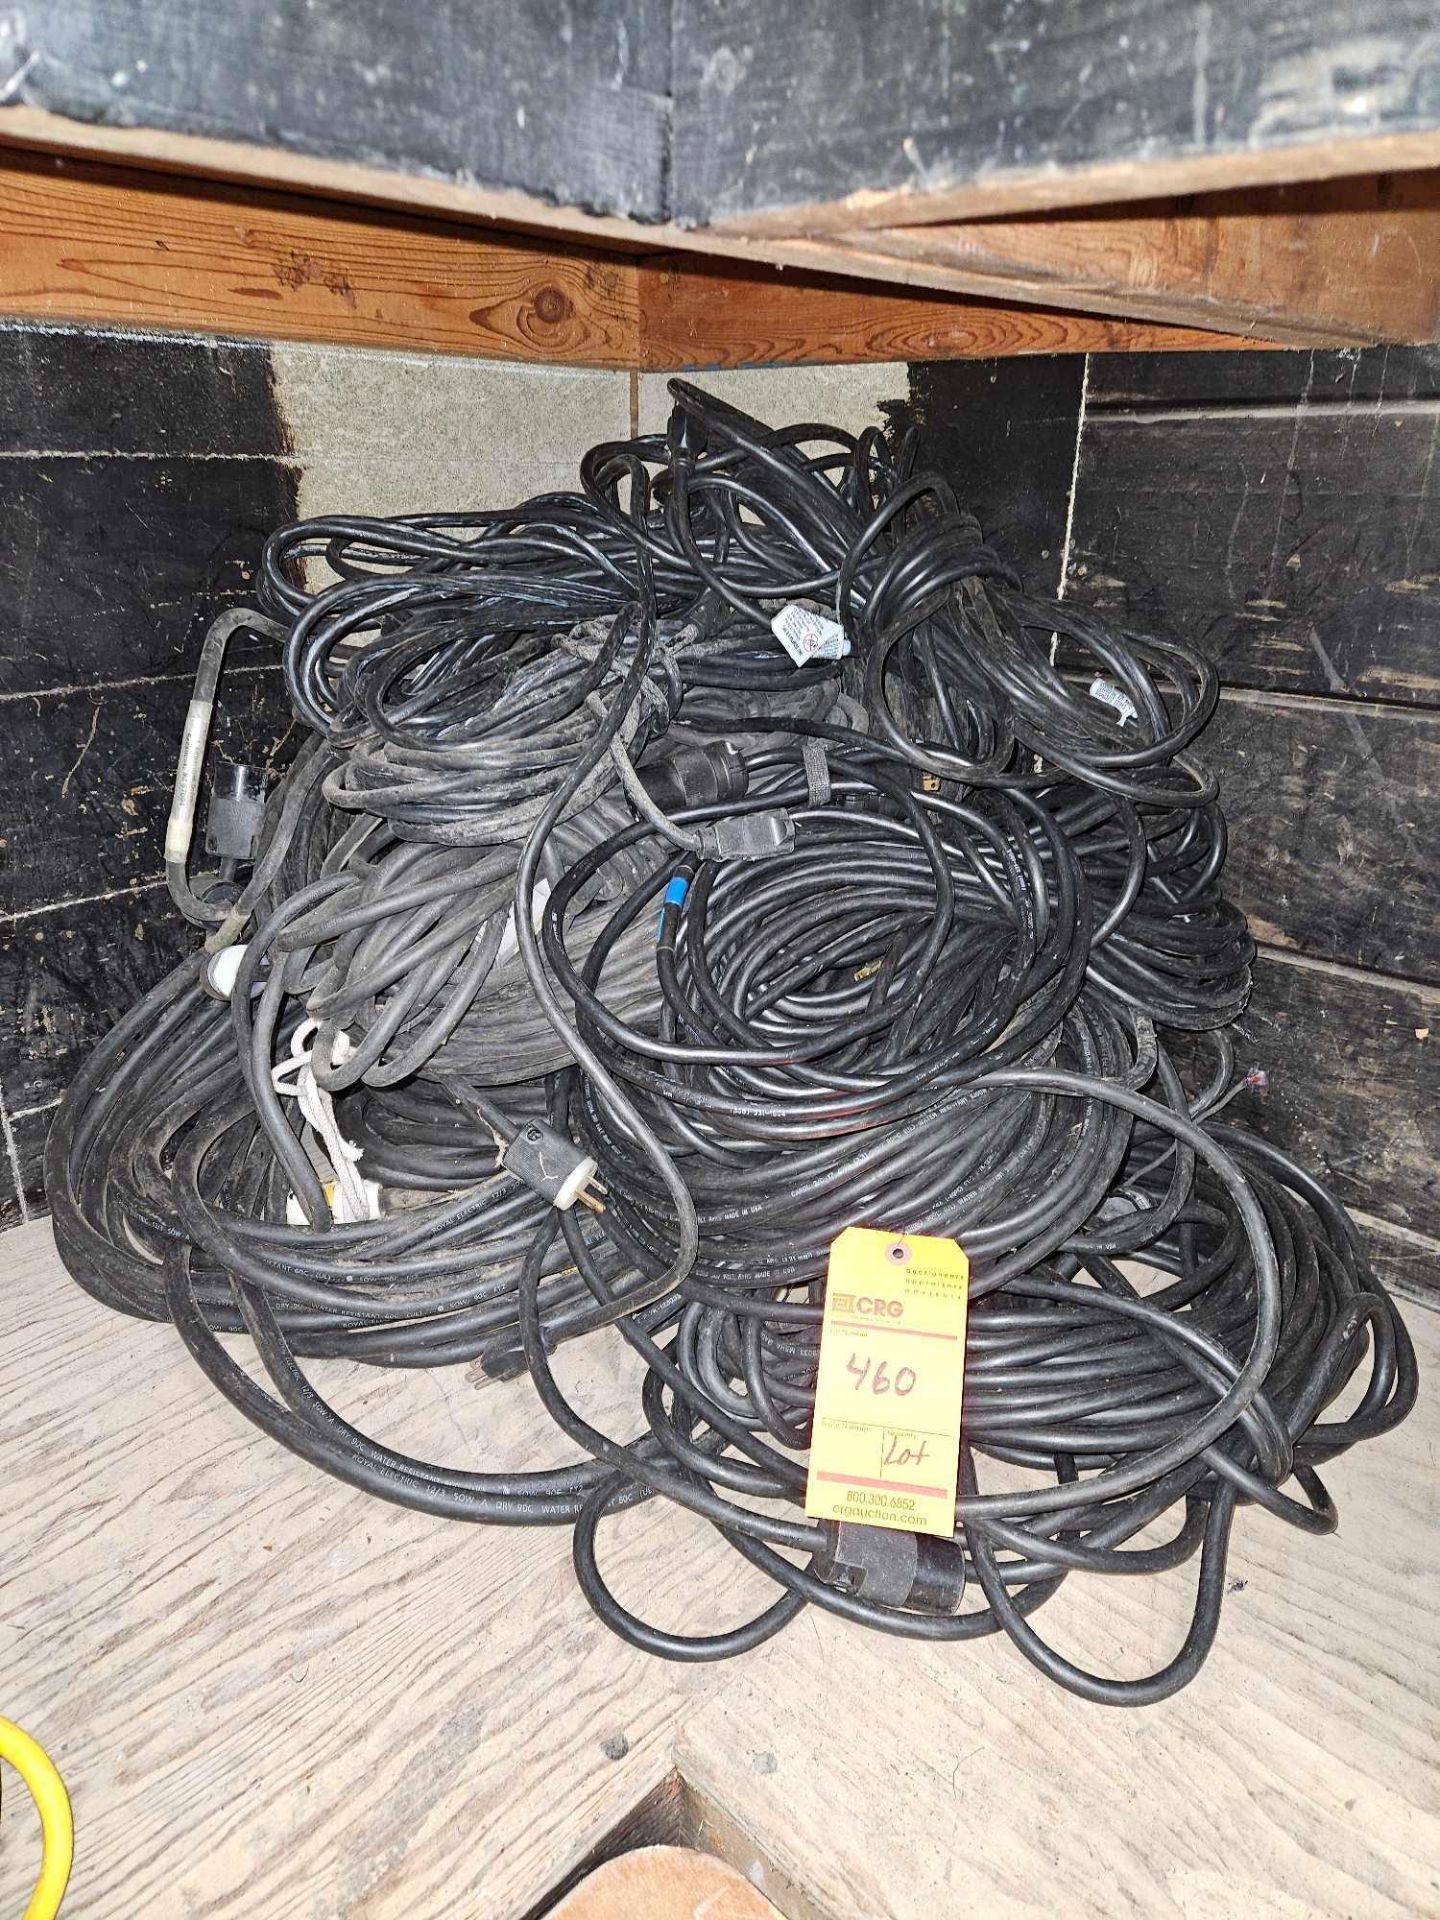 Lot of assorted 12/3 black extension cords with single tap, (2) 100ft, (1) 80ft, (4) 50ft, (30 40ft